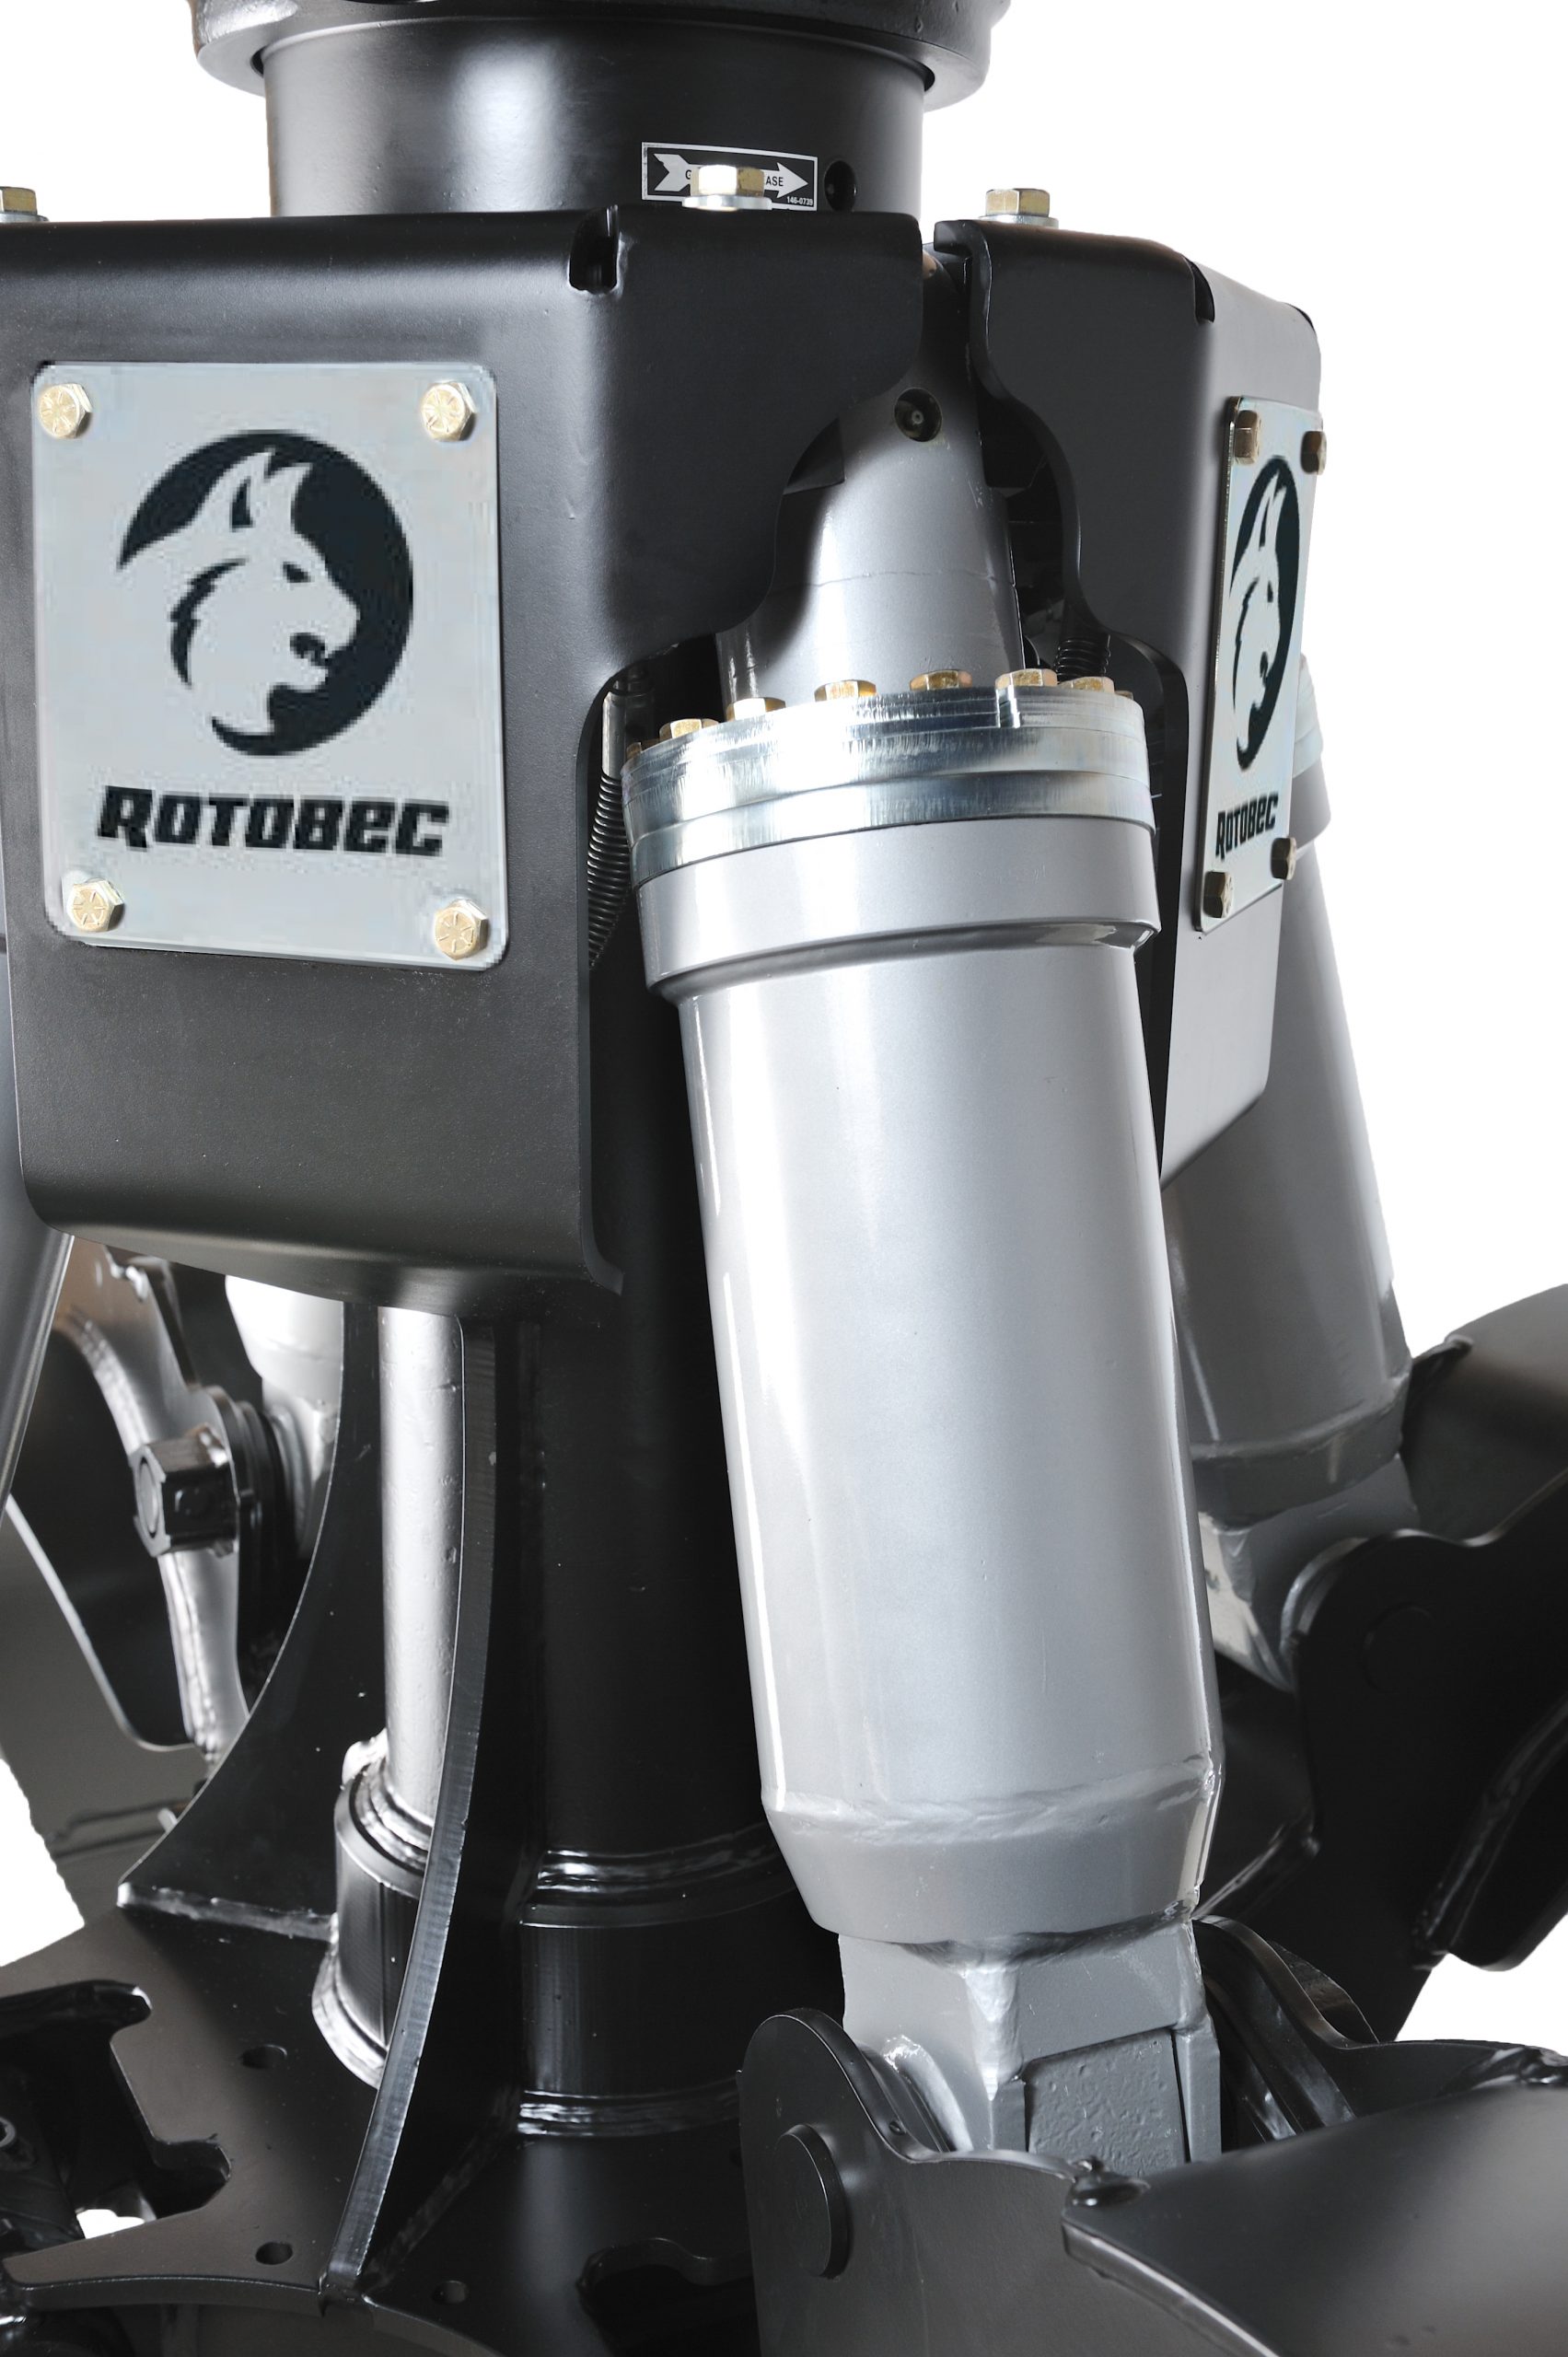 Rotobec's 360 degrees, guarded cylinder with the Rotobec logo on it.